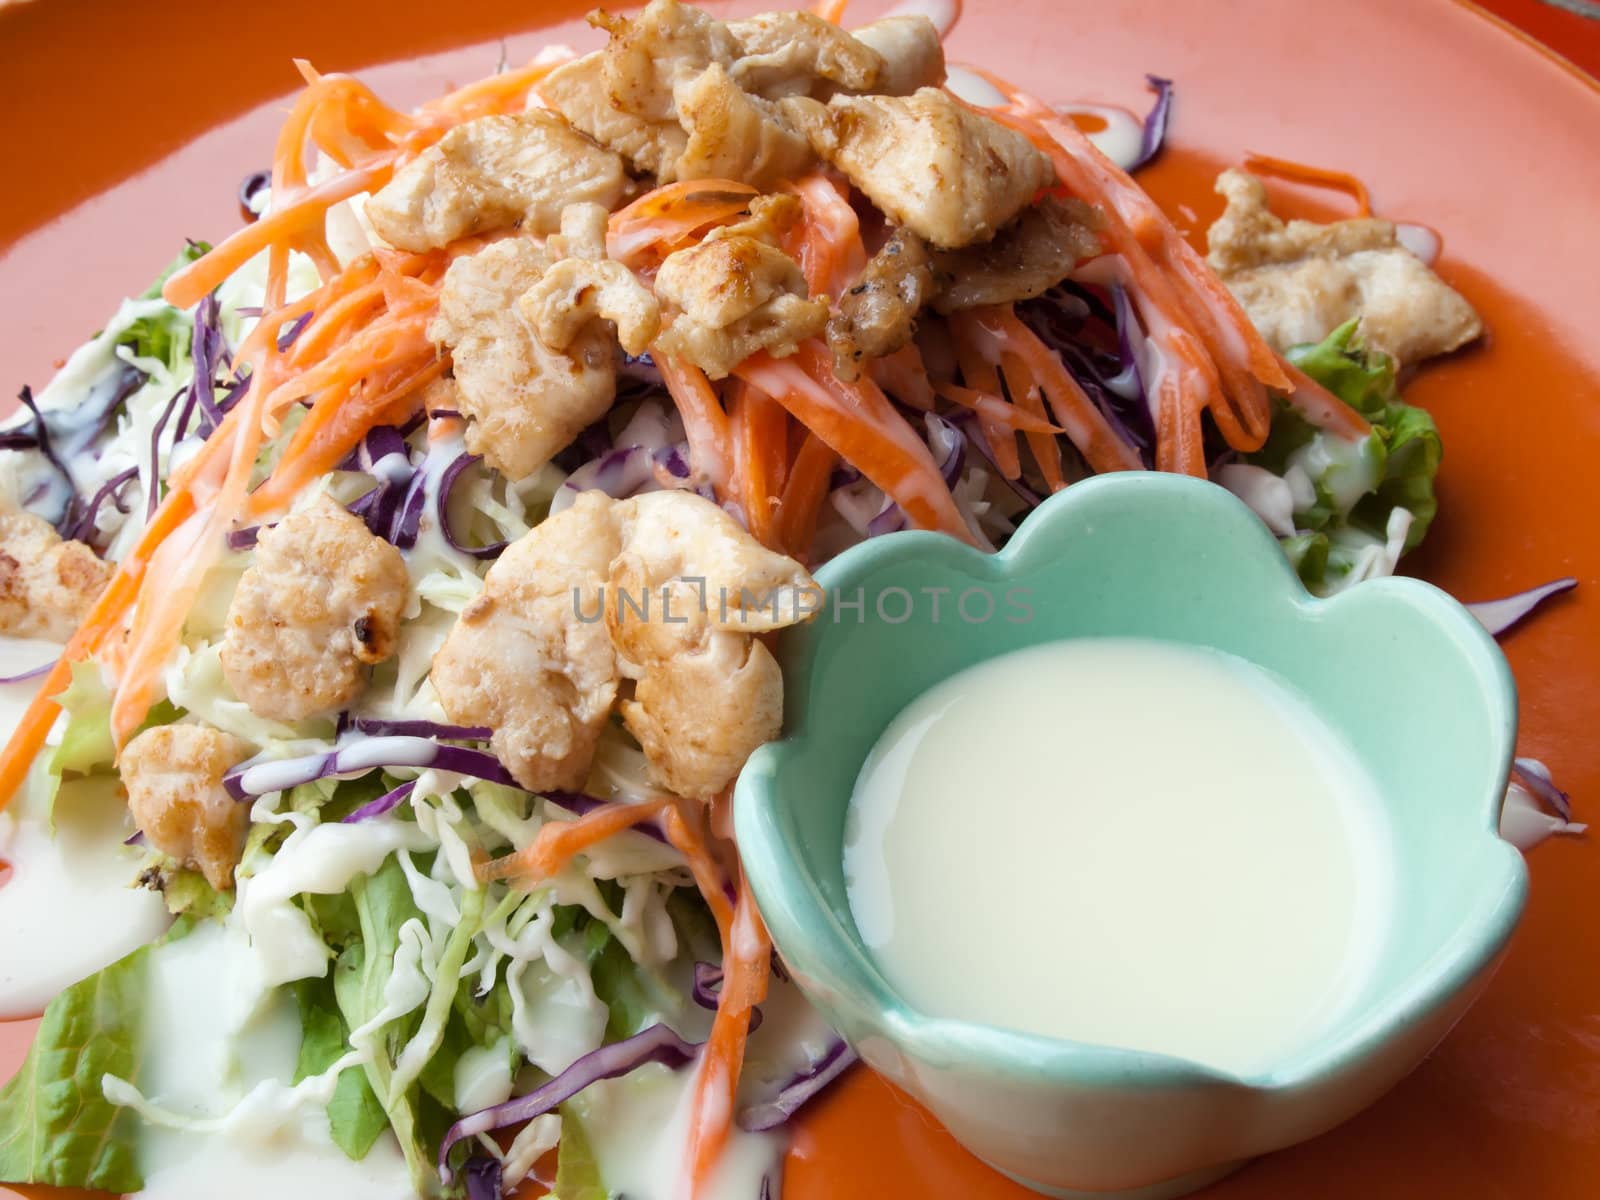 Chicken salad on a plate with salad dressing